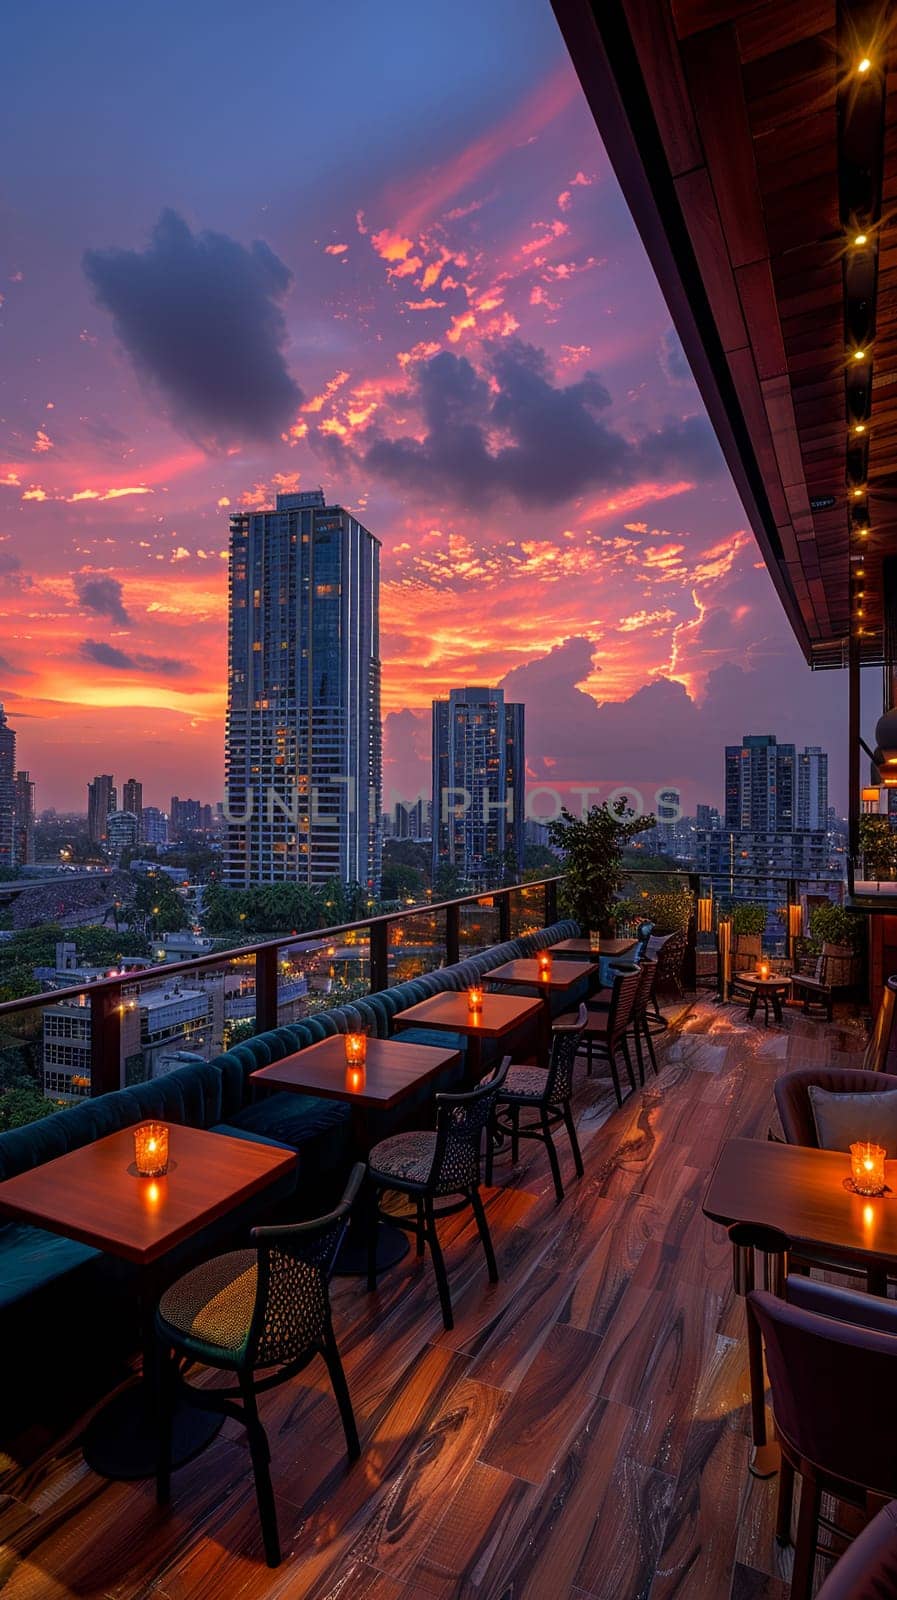 Swanky rooftop bar with panoramic city views and luxe decor.